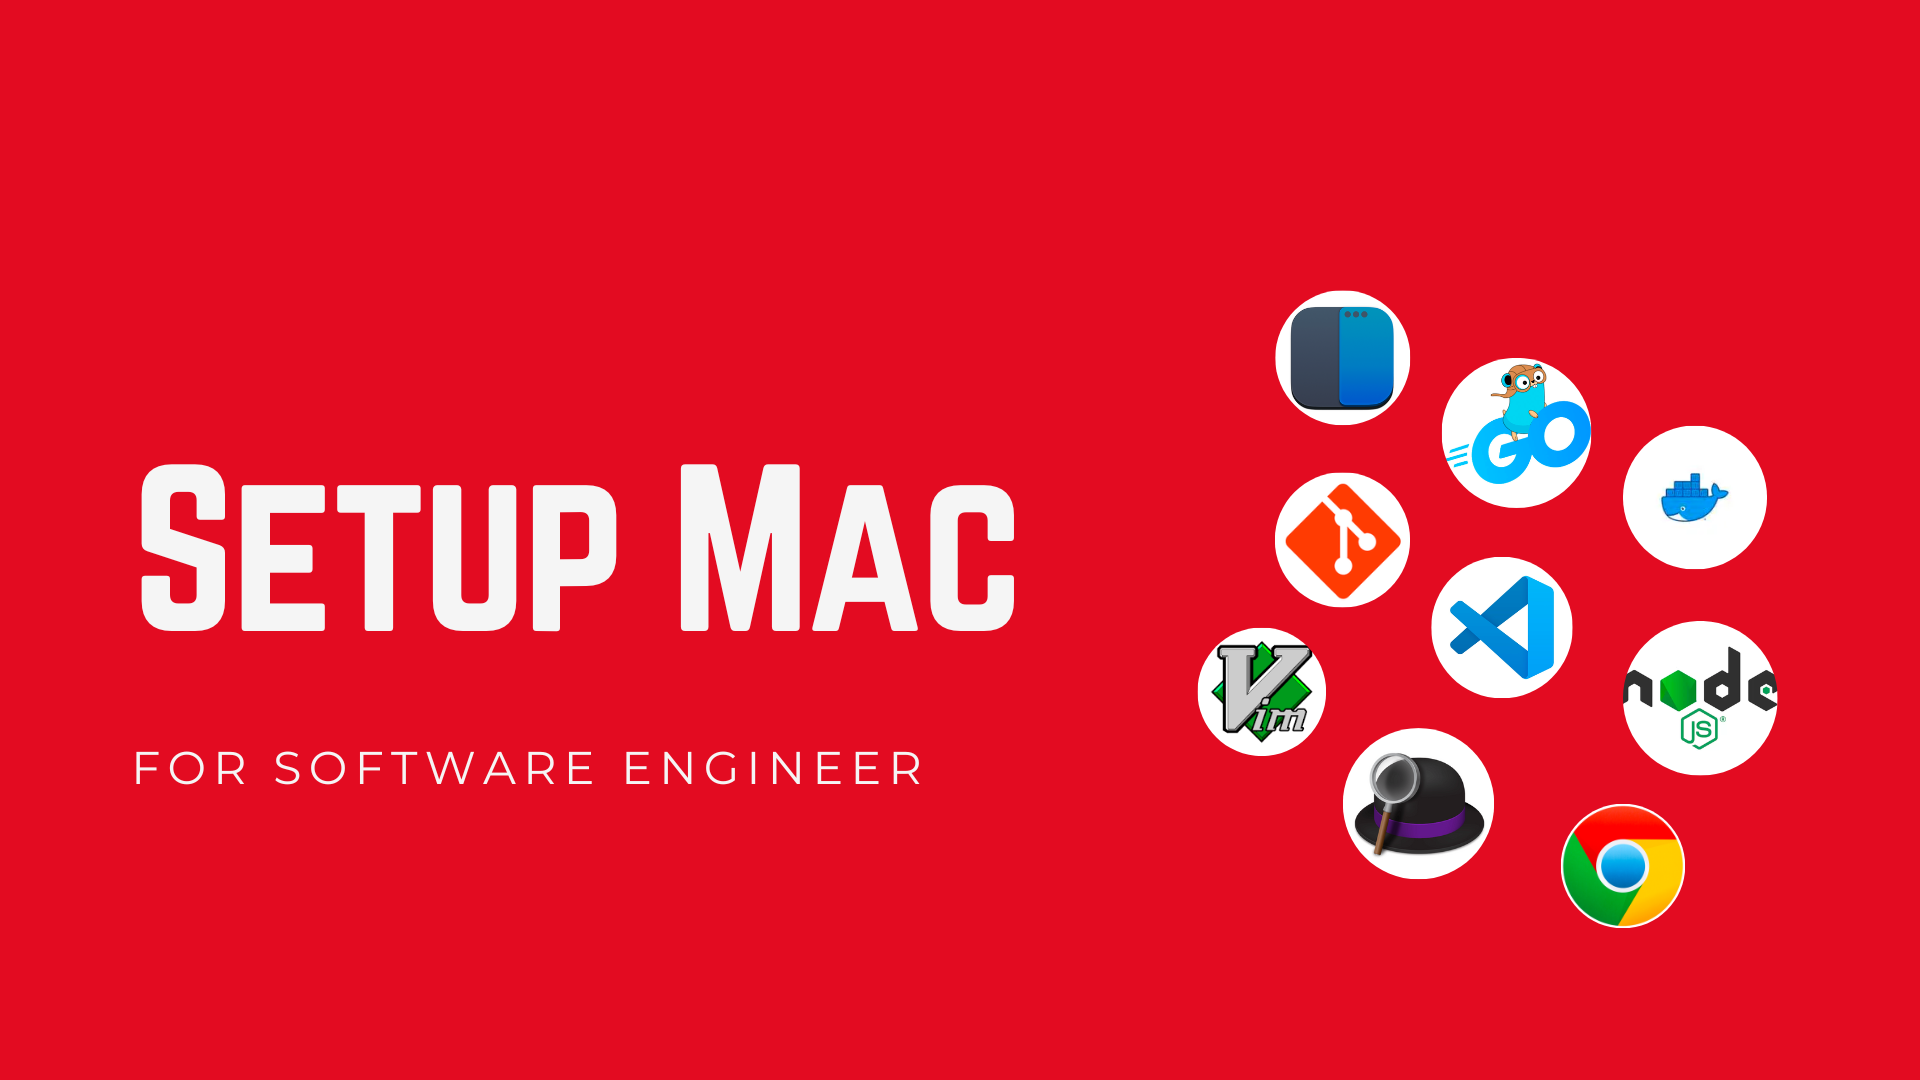 Cover Image for Setup Mac as Software Engineer